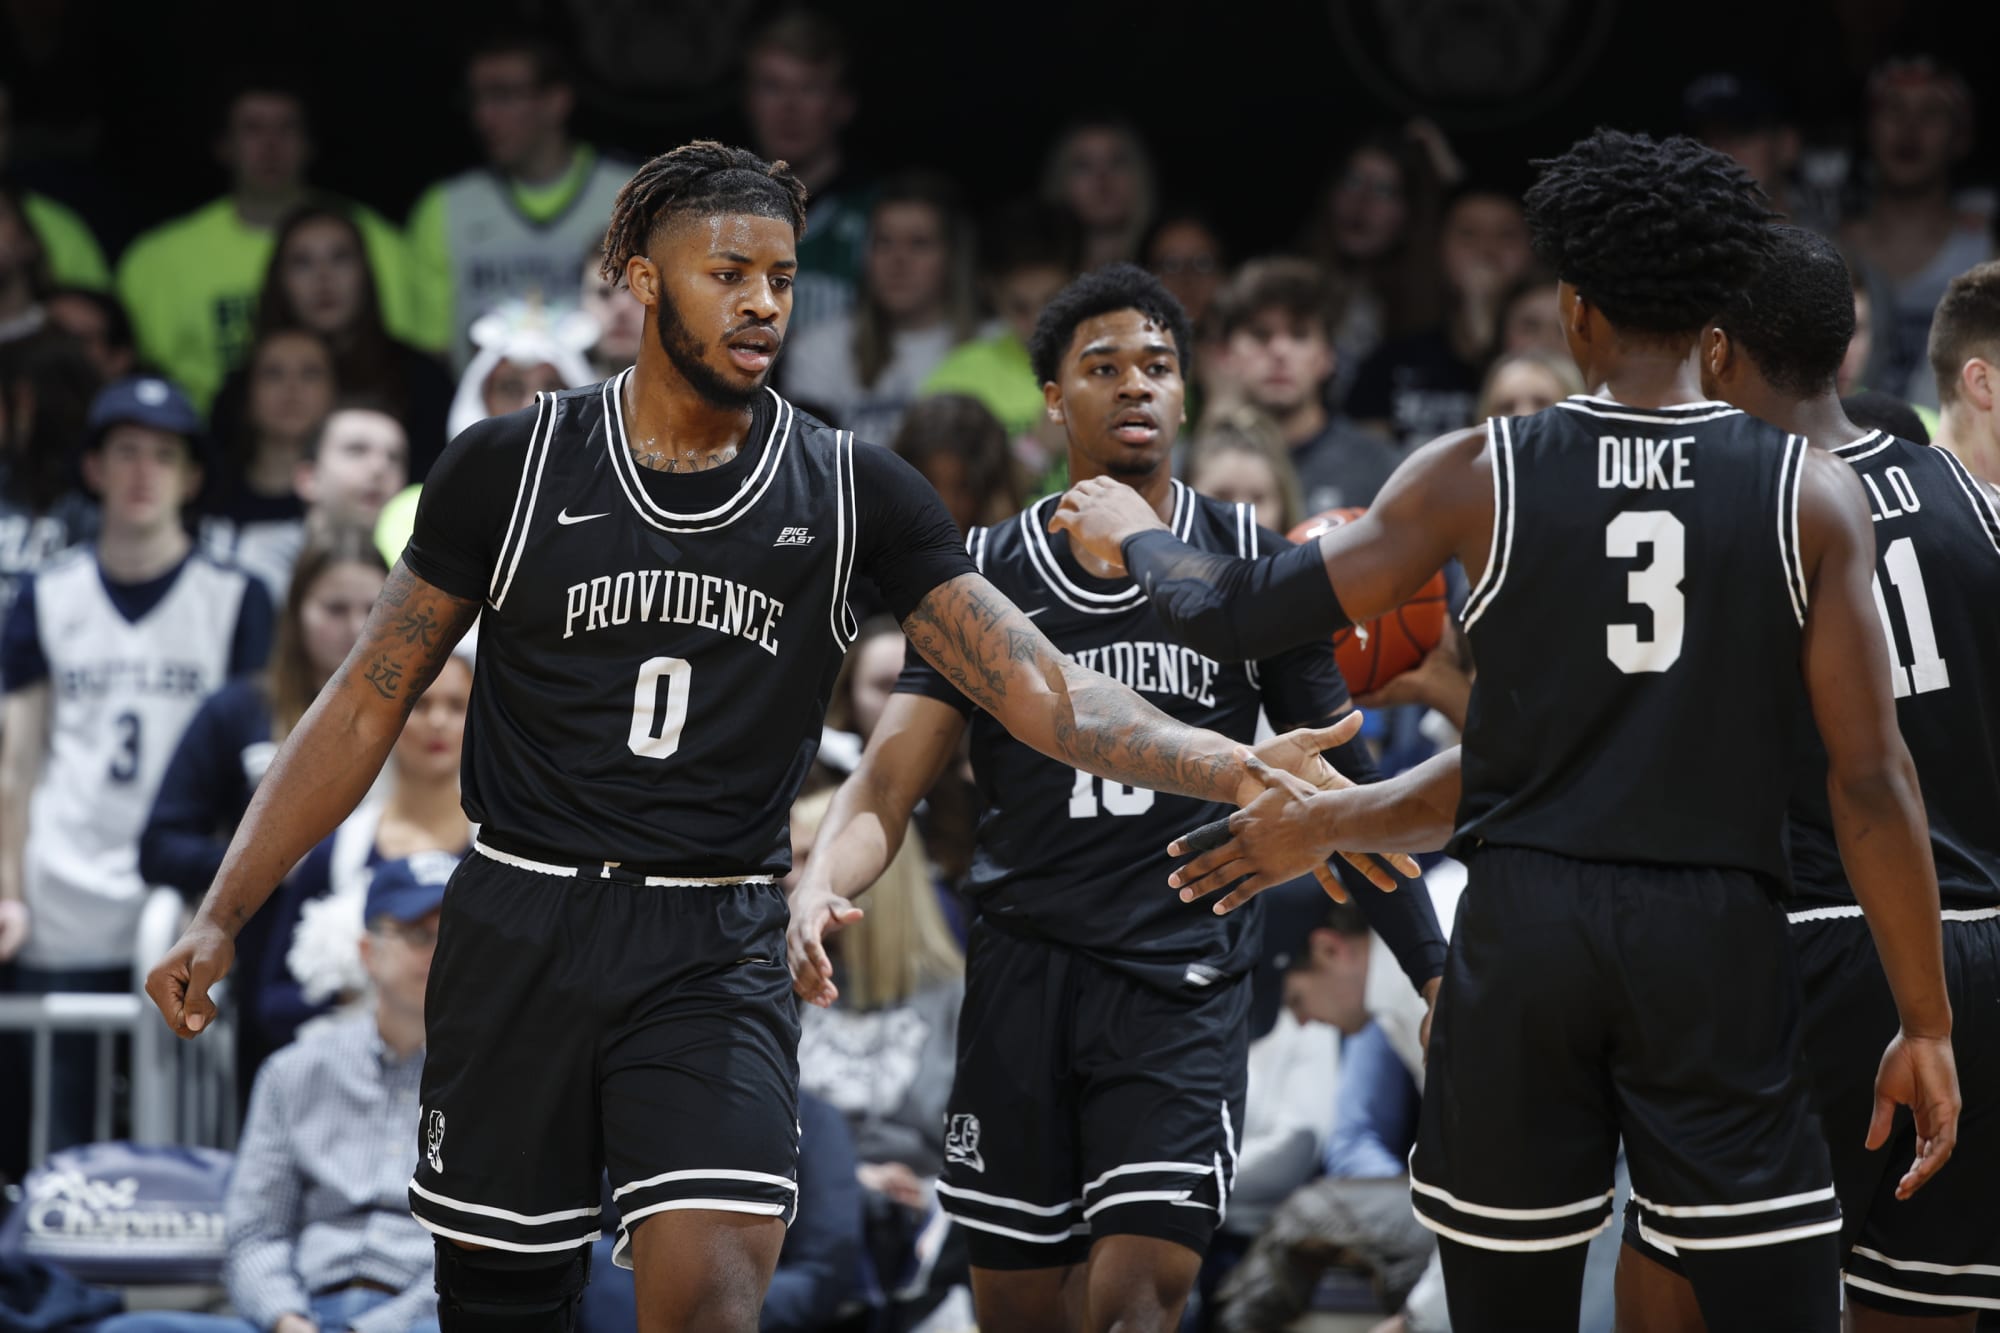 Providence vs Xavier: 2020-21 basketball game preview, TV schedule